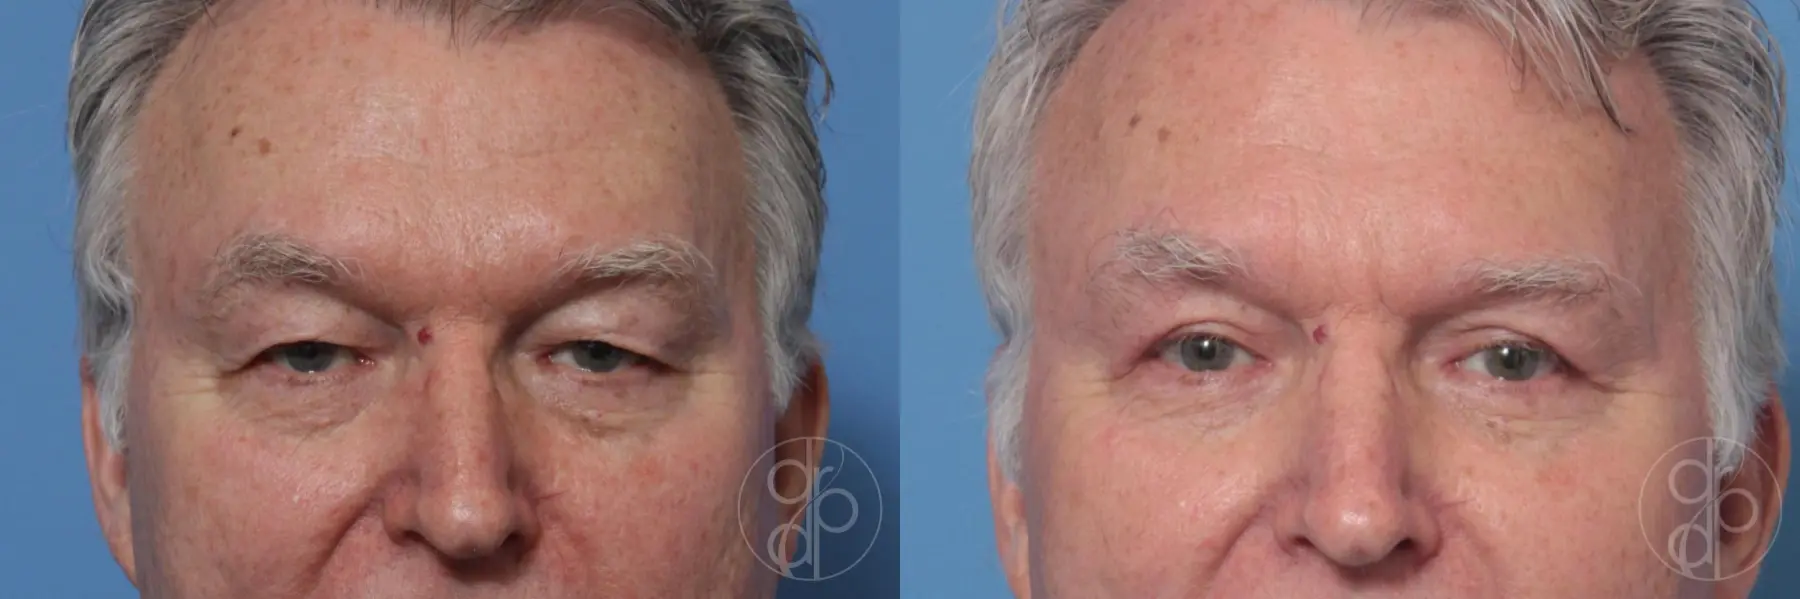 patient 10268 blepharoplasty before and after result - Before and After